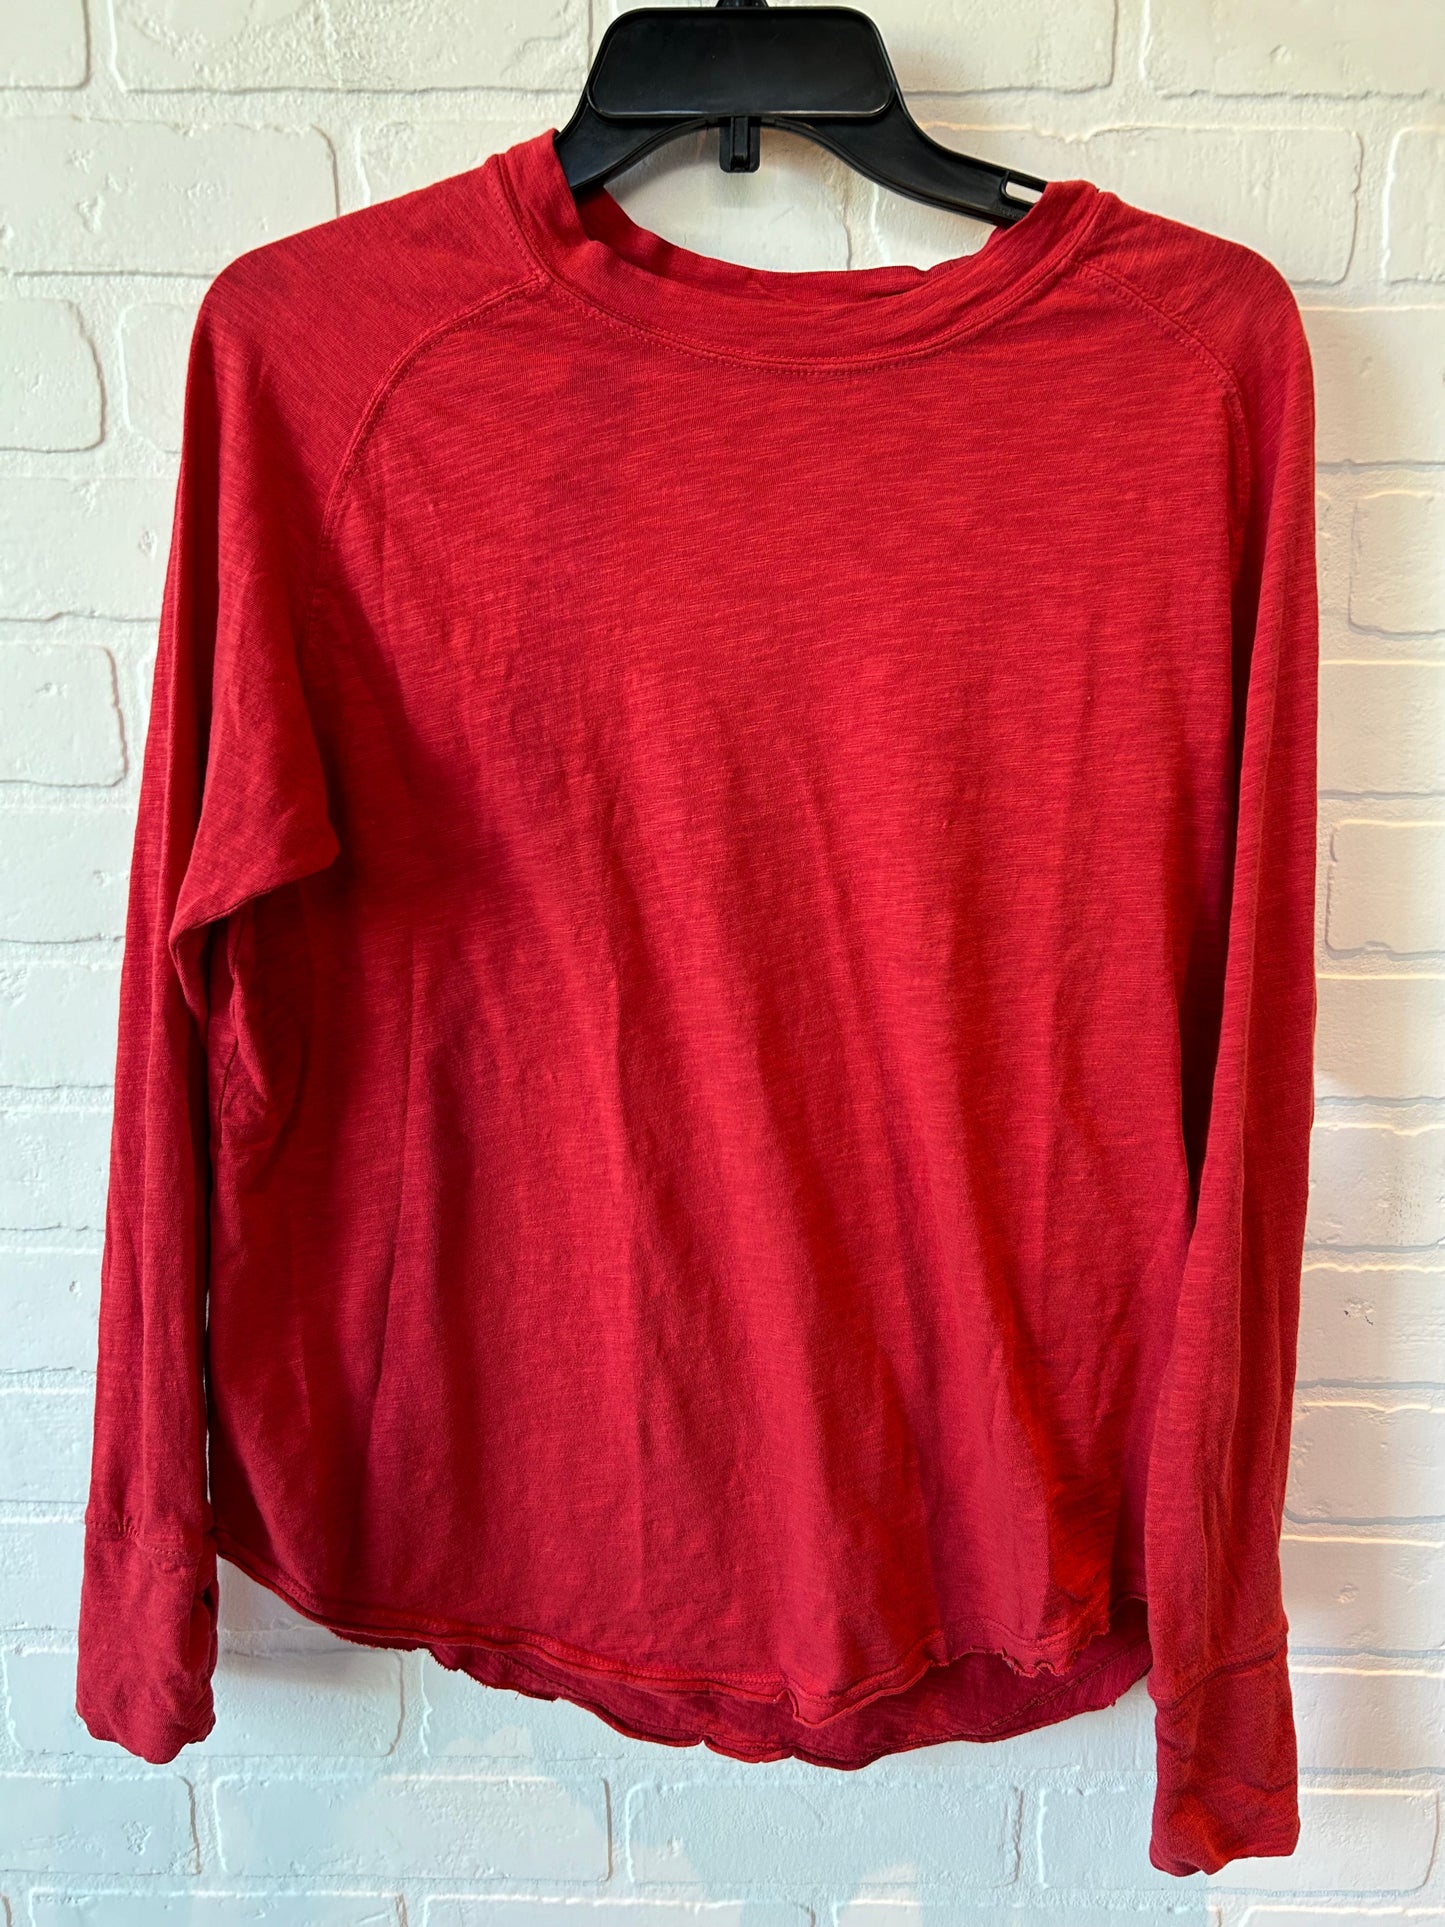 Red Athletic Top Long Sleeve Crewneck Zella, Size S